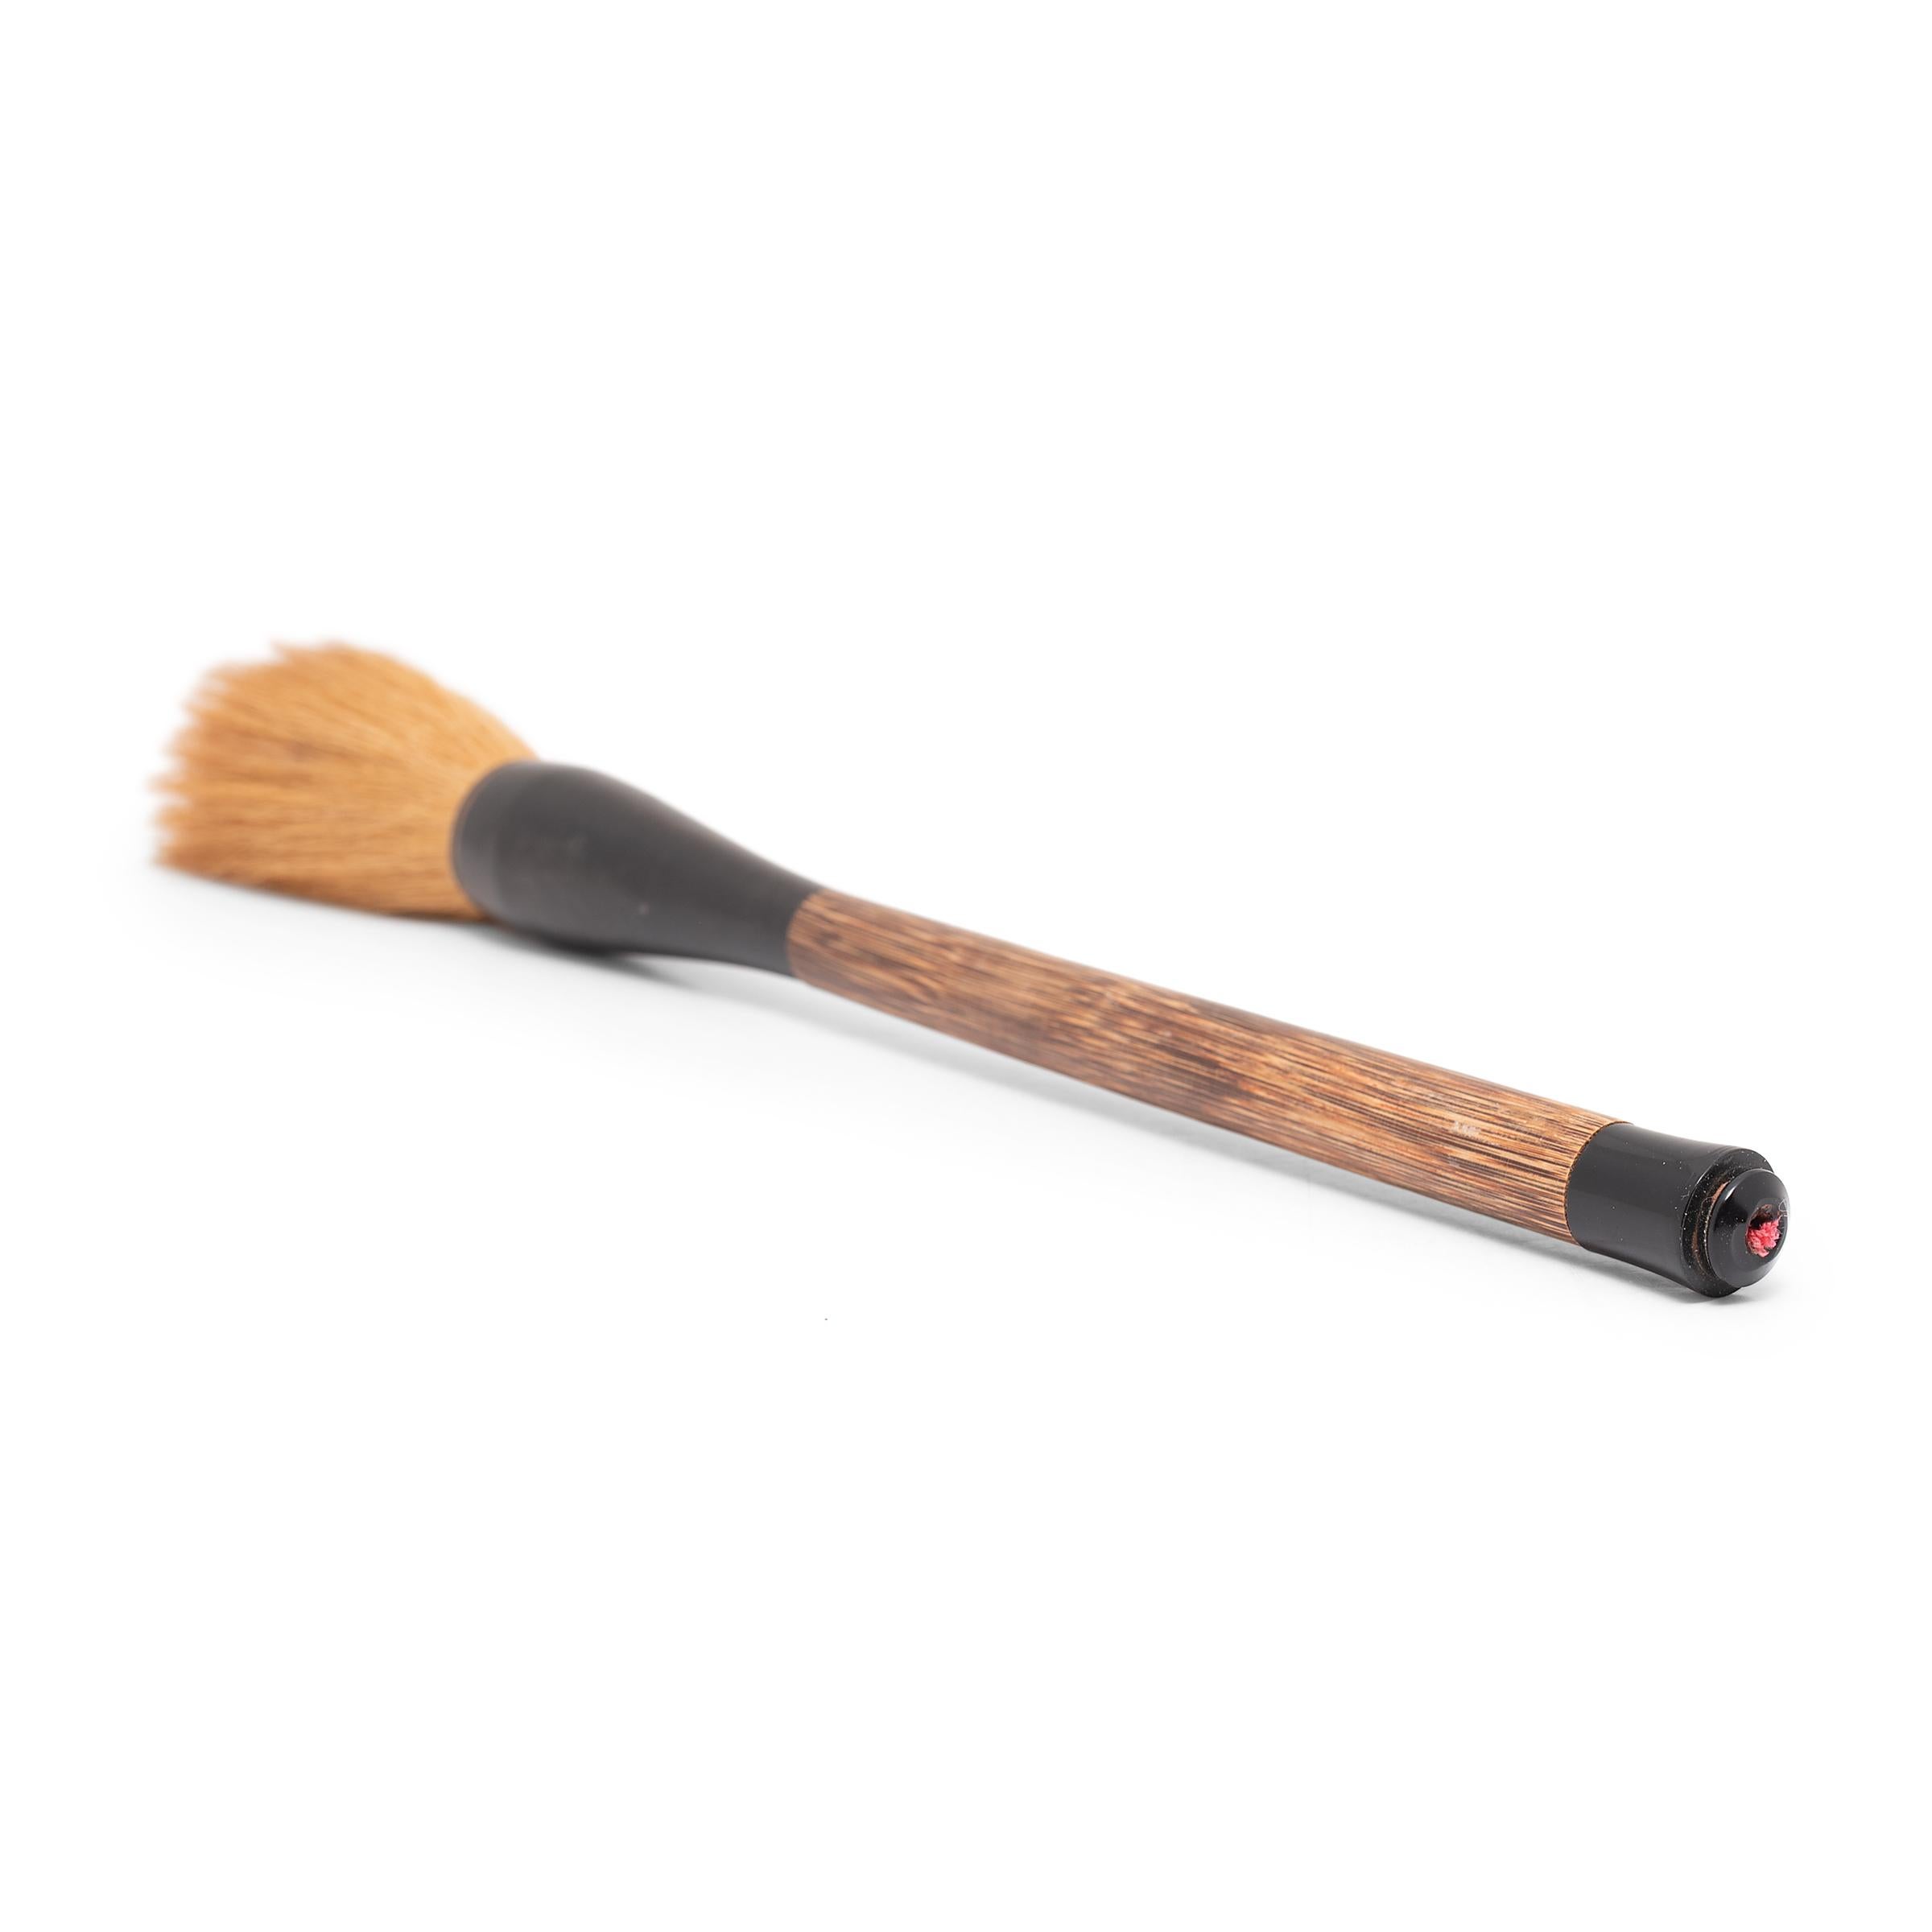 Along with paper, ink, and inkstone, the brush is one of the Four Treasures of the scholar’s studio. Arguably the most important tool, the brush served as a direct link to the artist’s creative spirit. This large calligraphy brush recreates antique